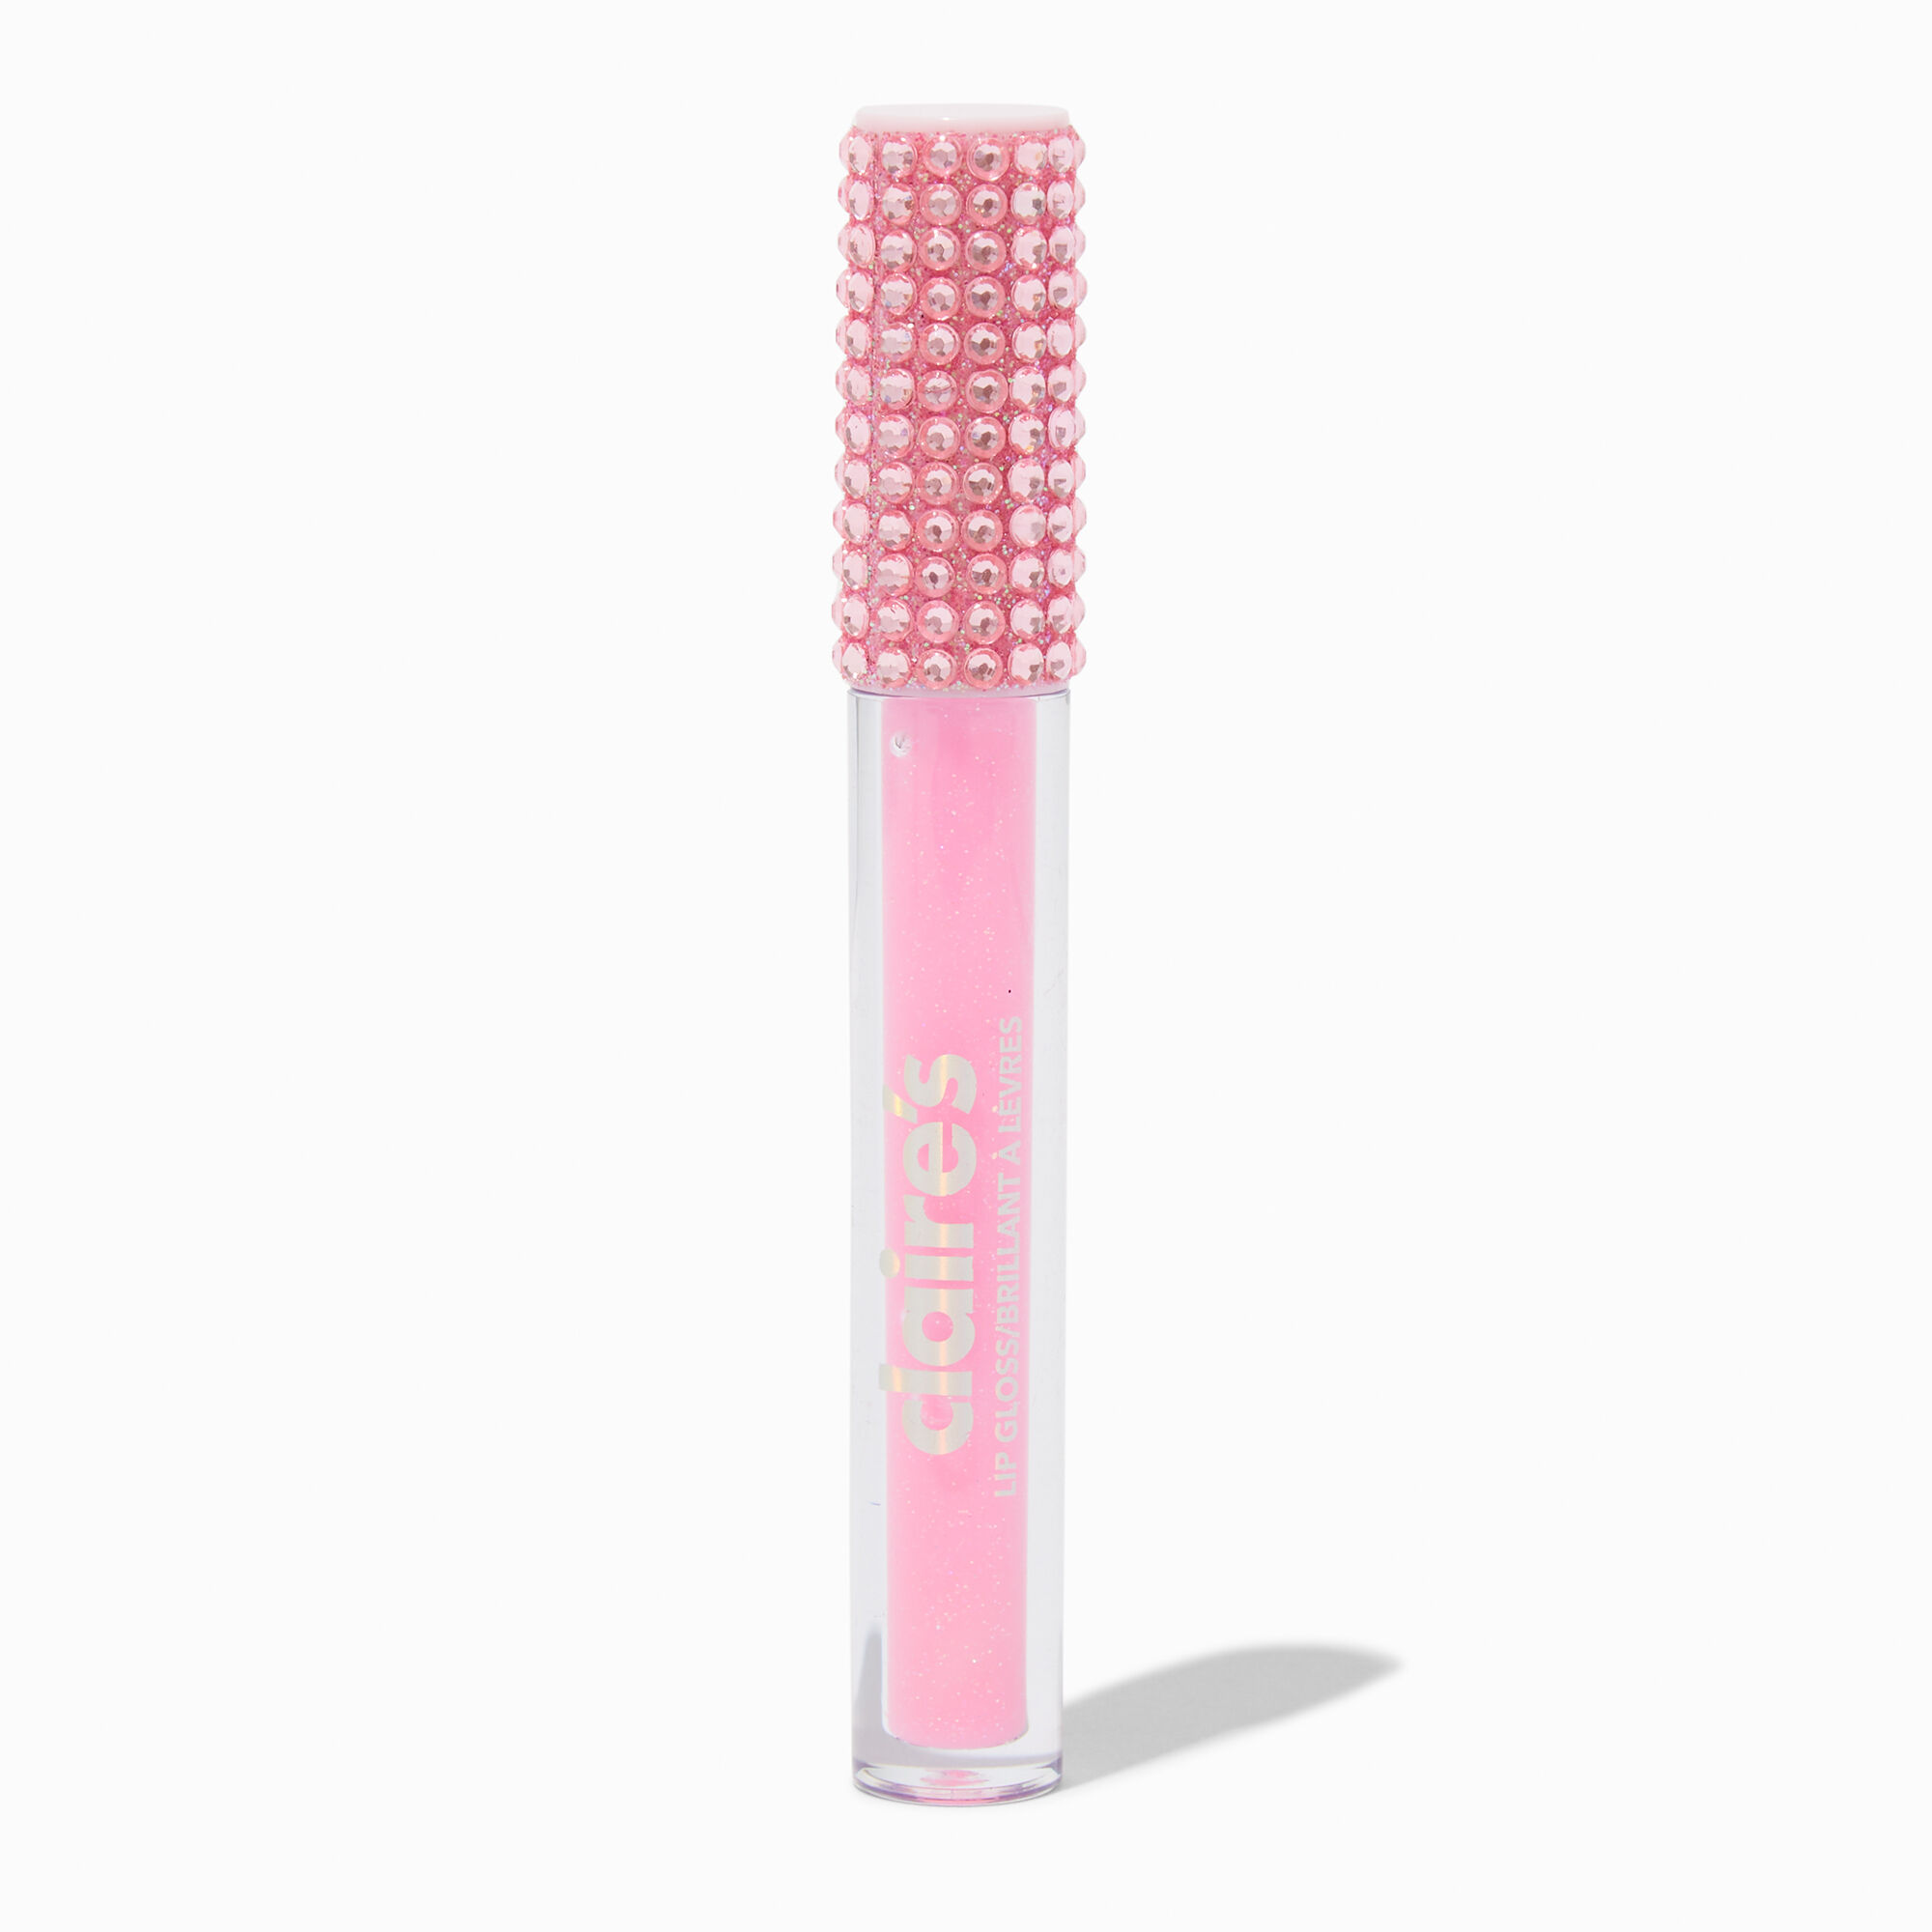 View Claires Bling Glitter Lip Gloss Wand Pink information